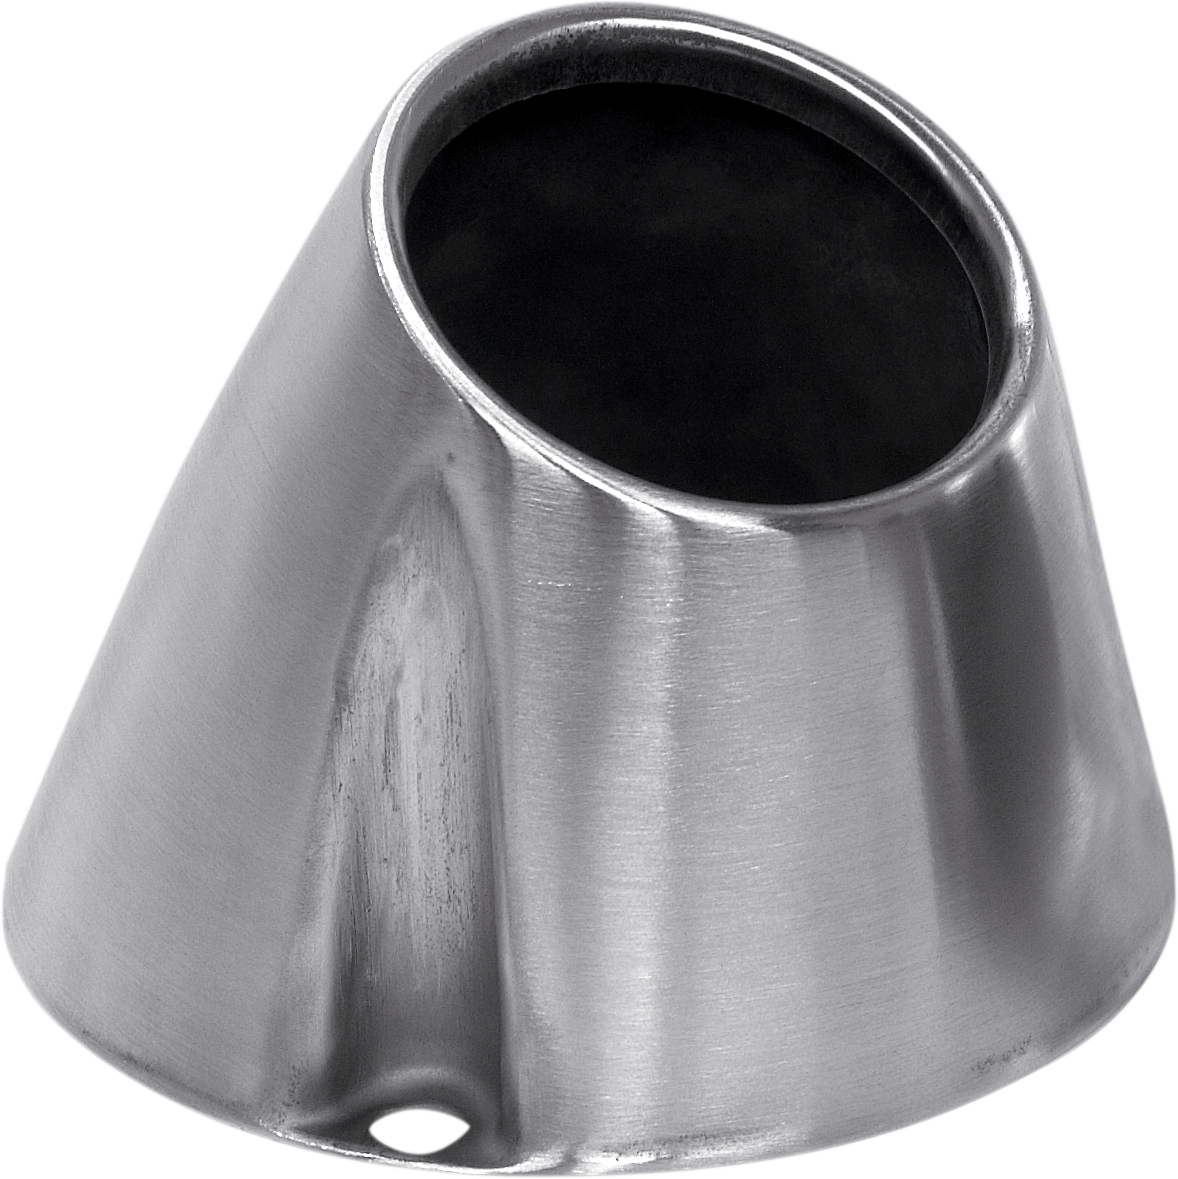 PRO CIRCUIT End Cap - Stainless Steel - 4" PC4022-0000